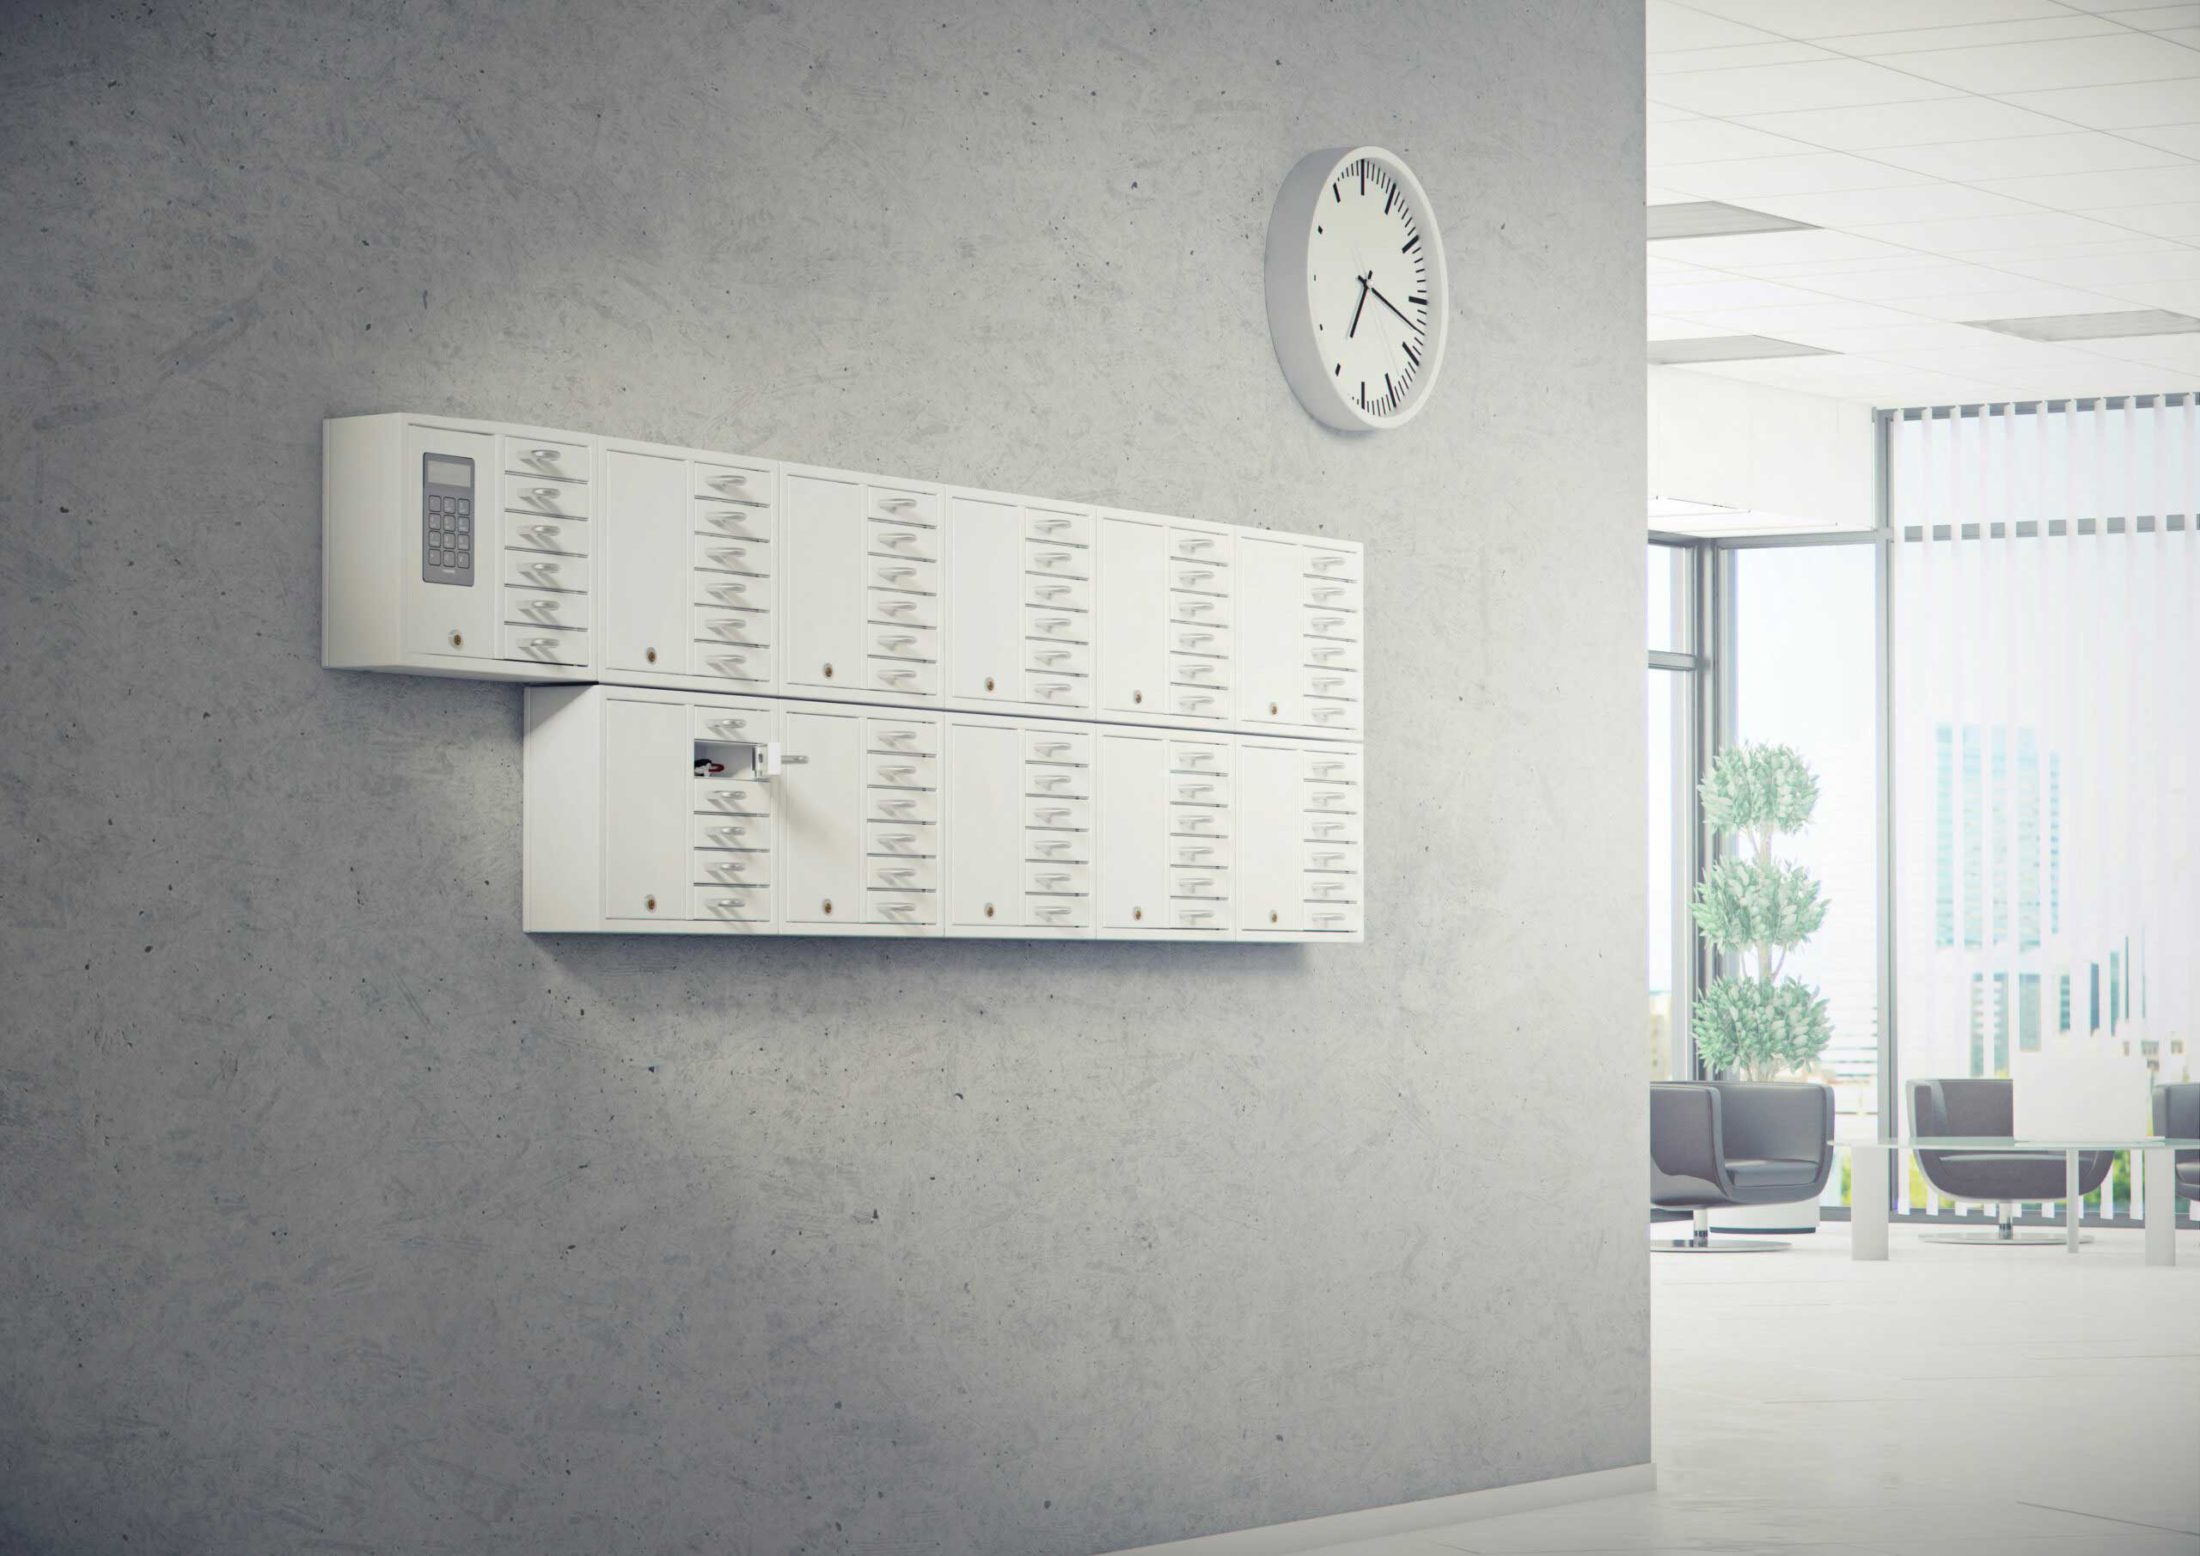 The 9006 S key cabinet from the System series plus ten of the 9006 E from the Expansion series is handling the company's key management. Mounted on the wall with open compartments containing bunches of keys.